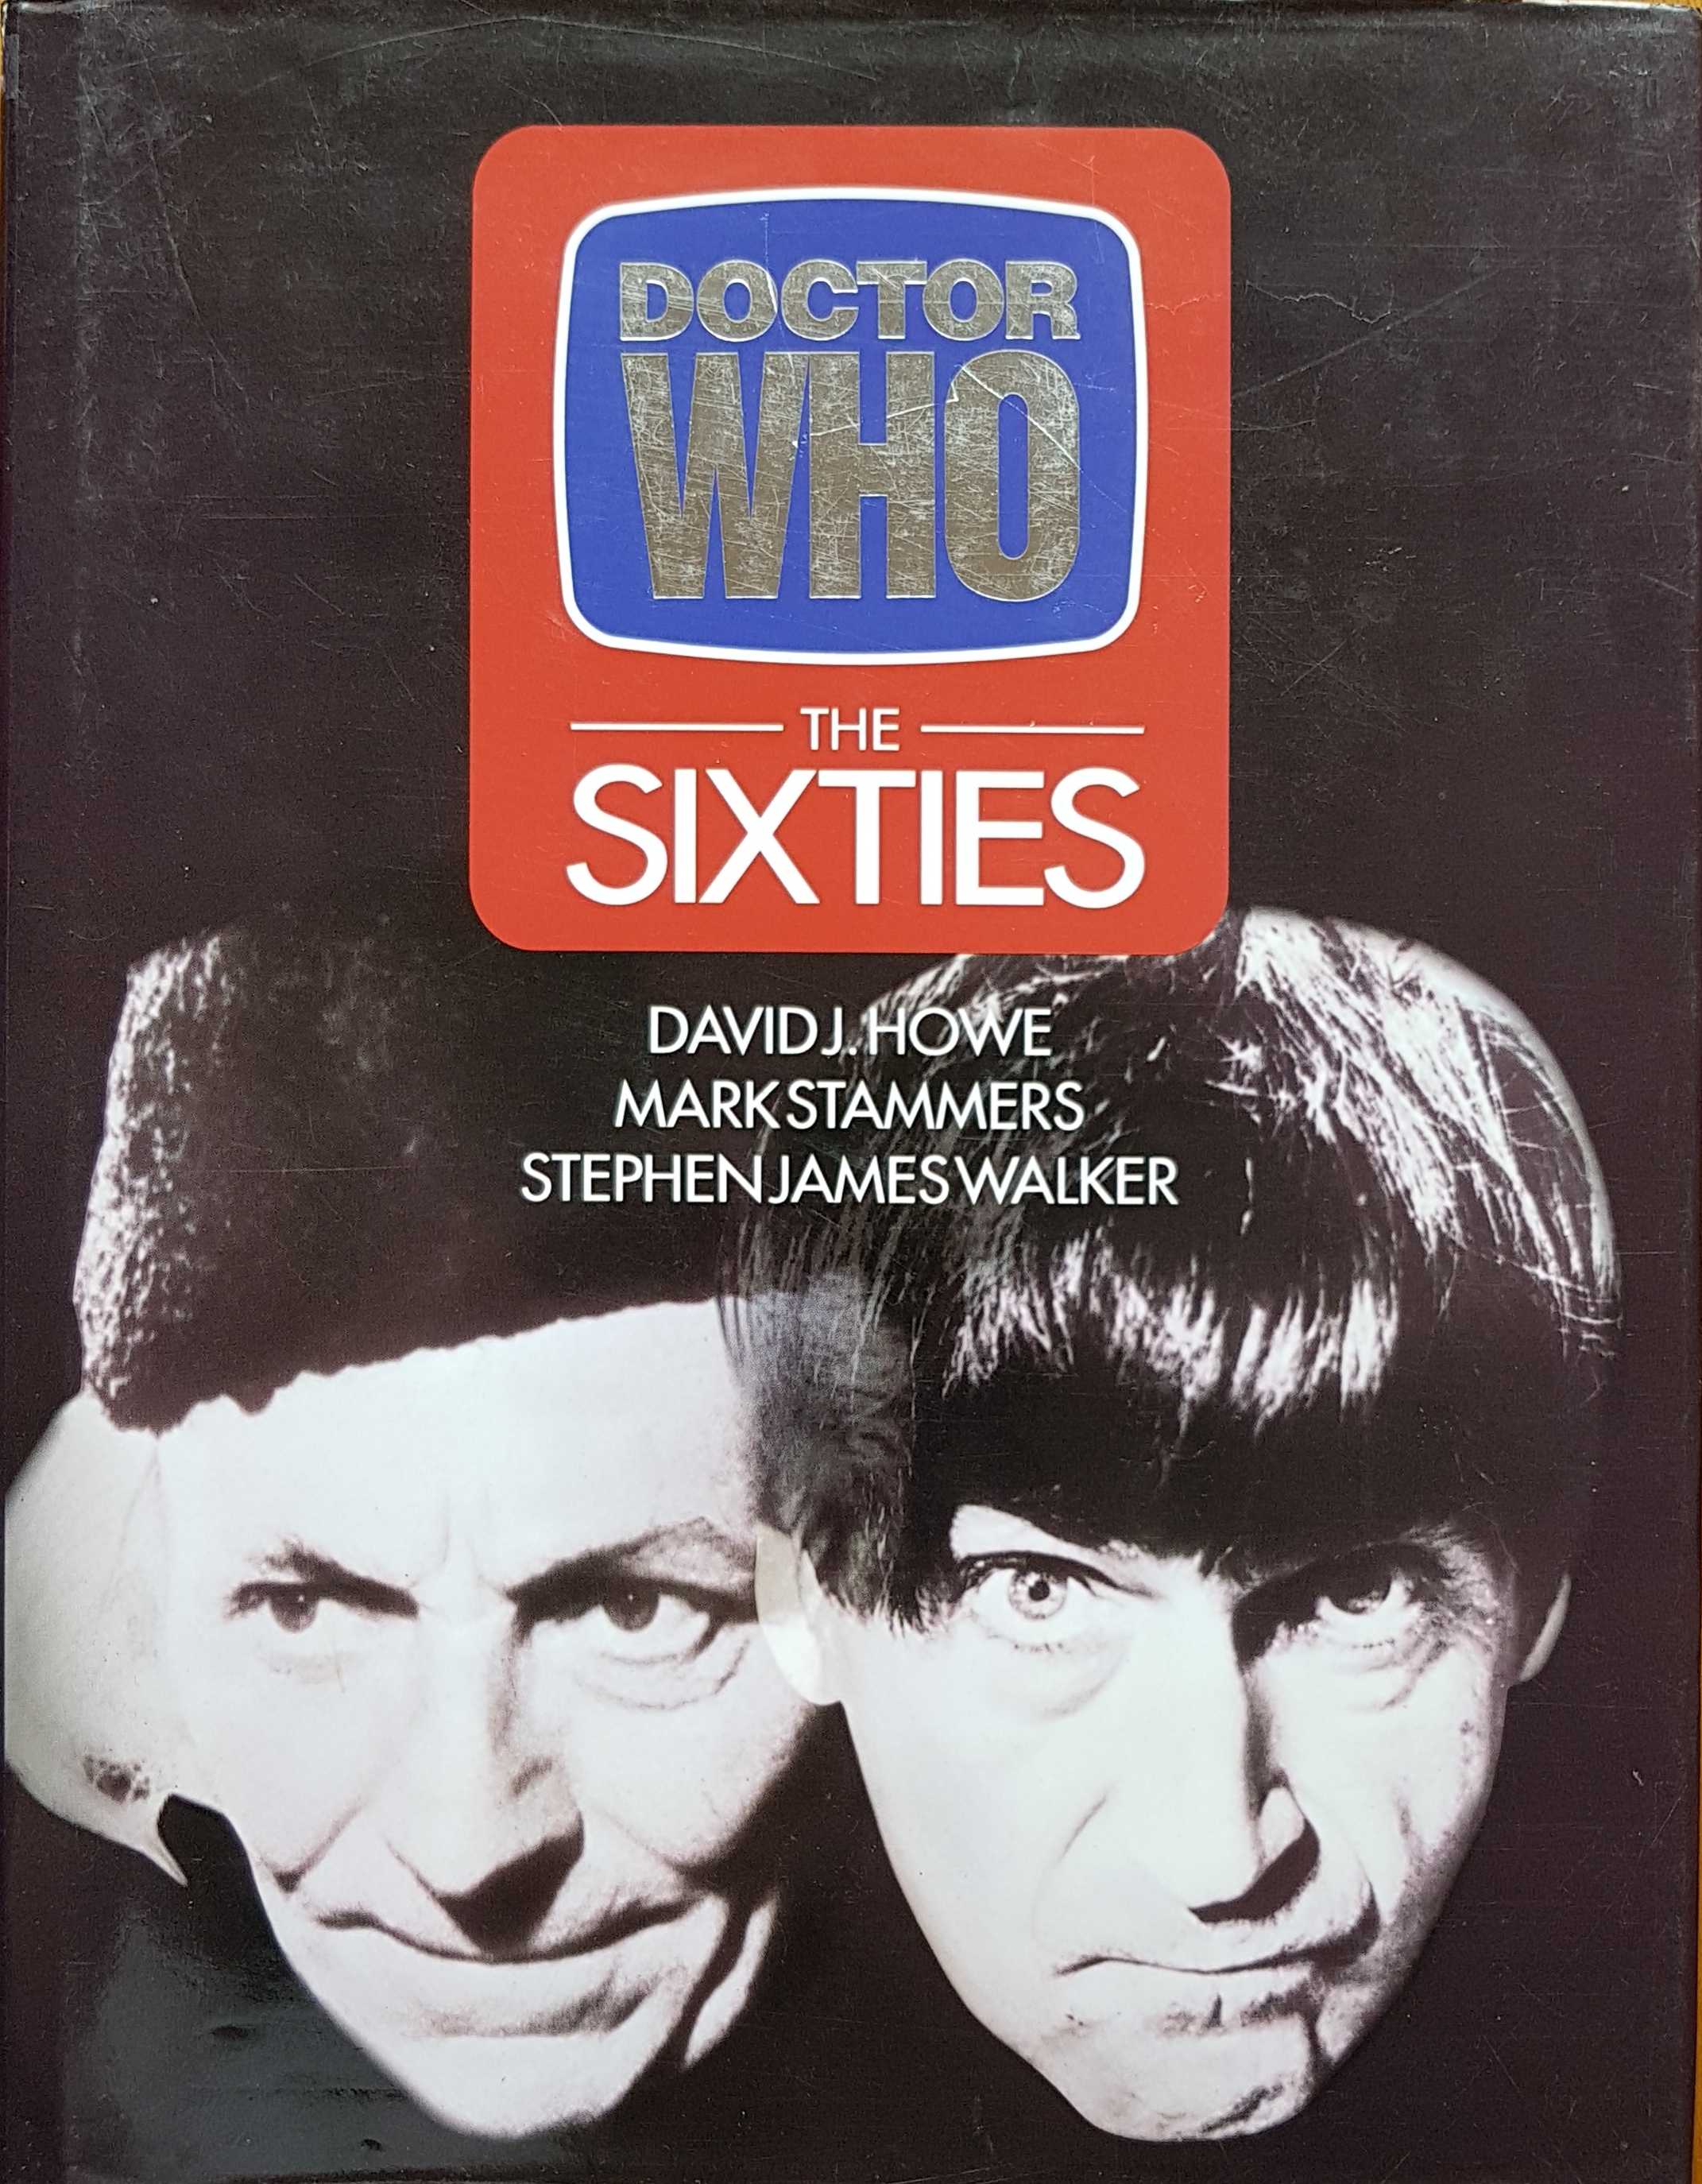 Picture of 1-85227-420-4 Doctor Who - The sixties by artist David J. Howe / Mark Stammers / Stephen James Walker from the BBC records and Tapes library